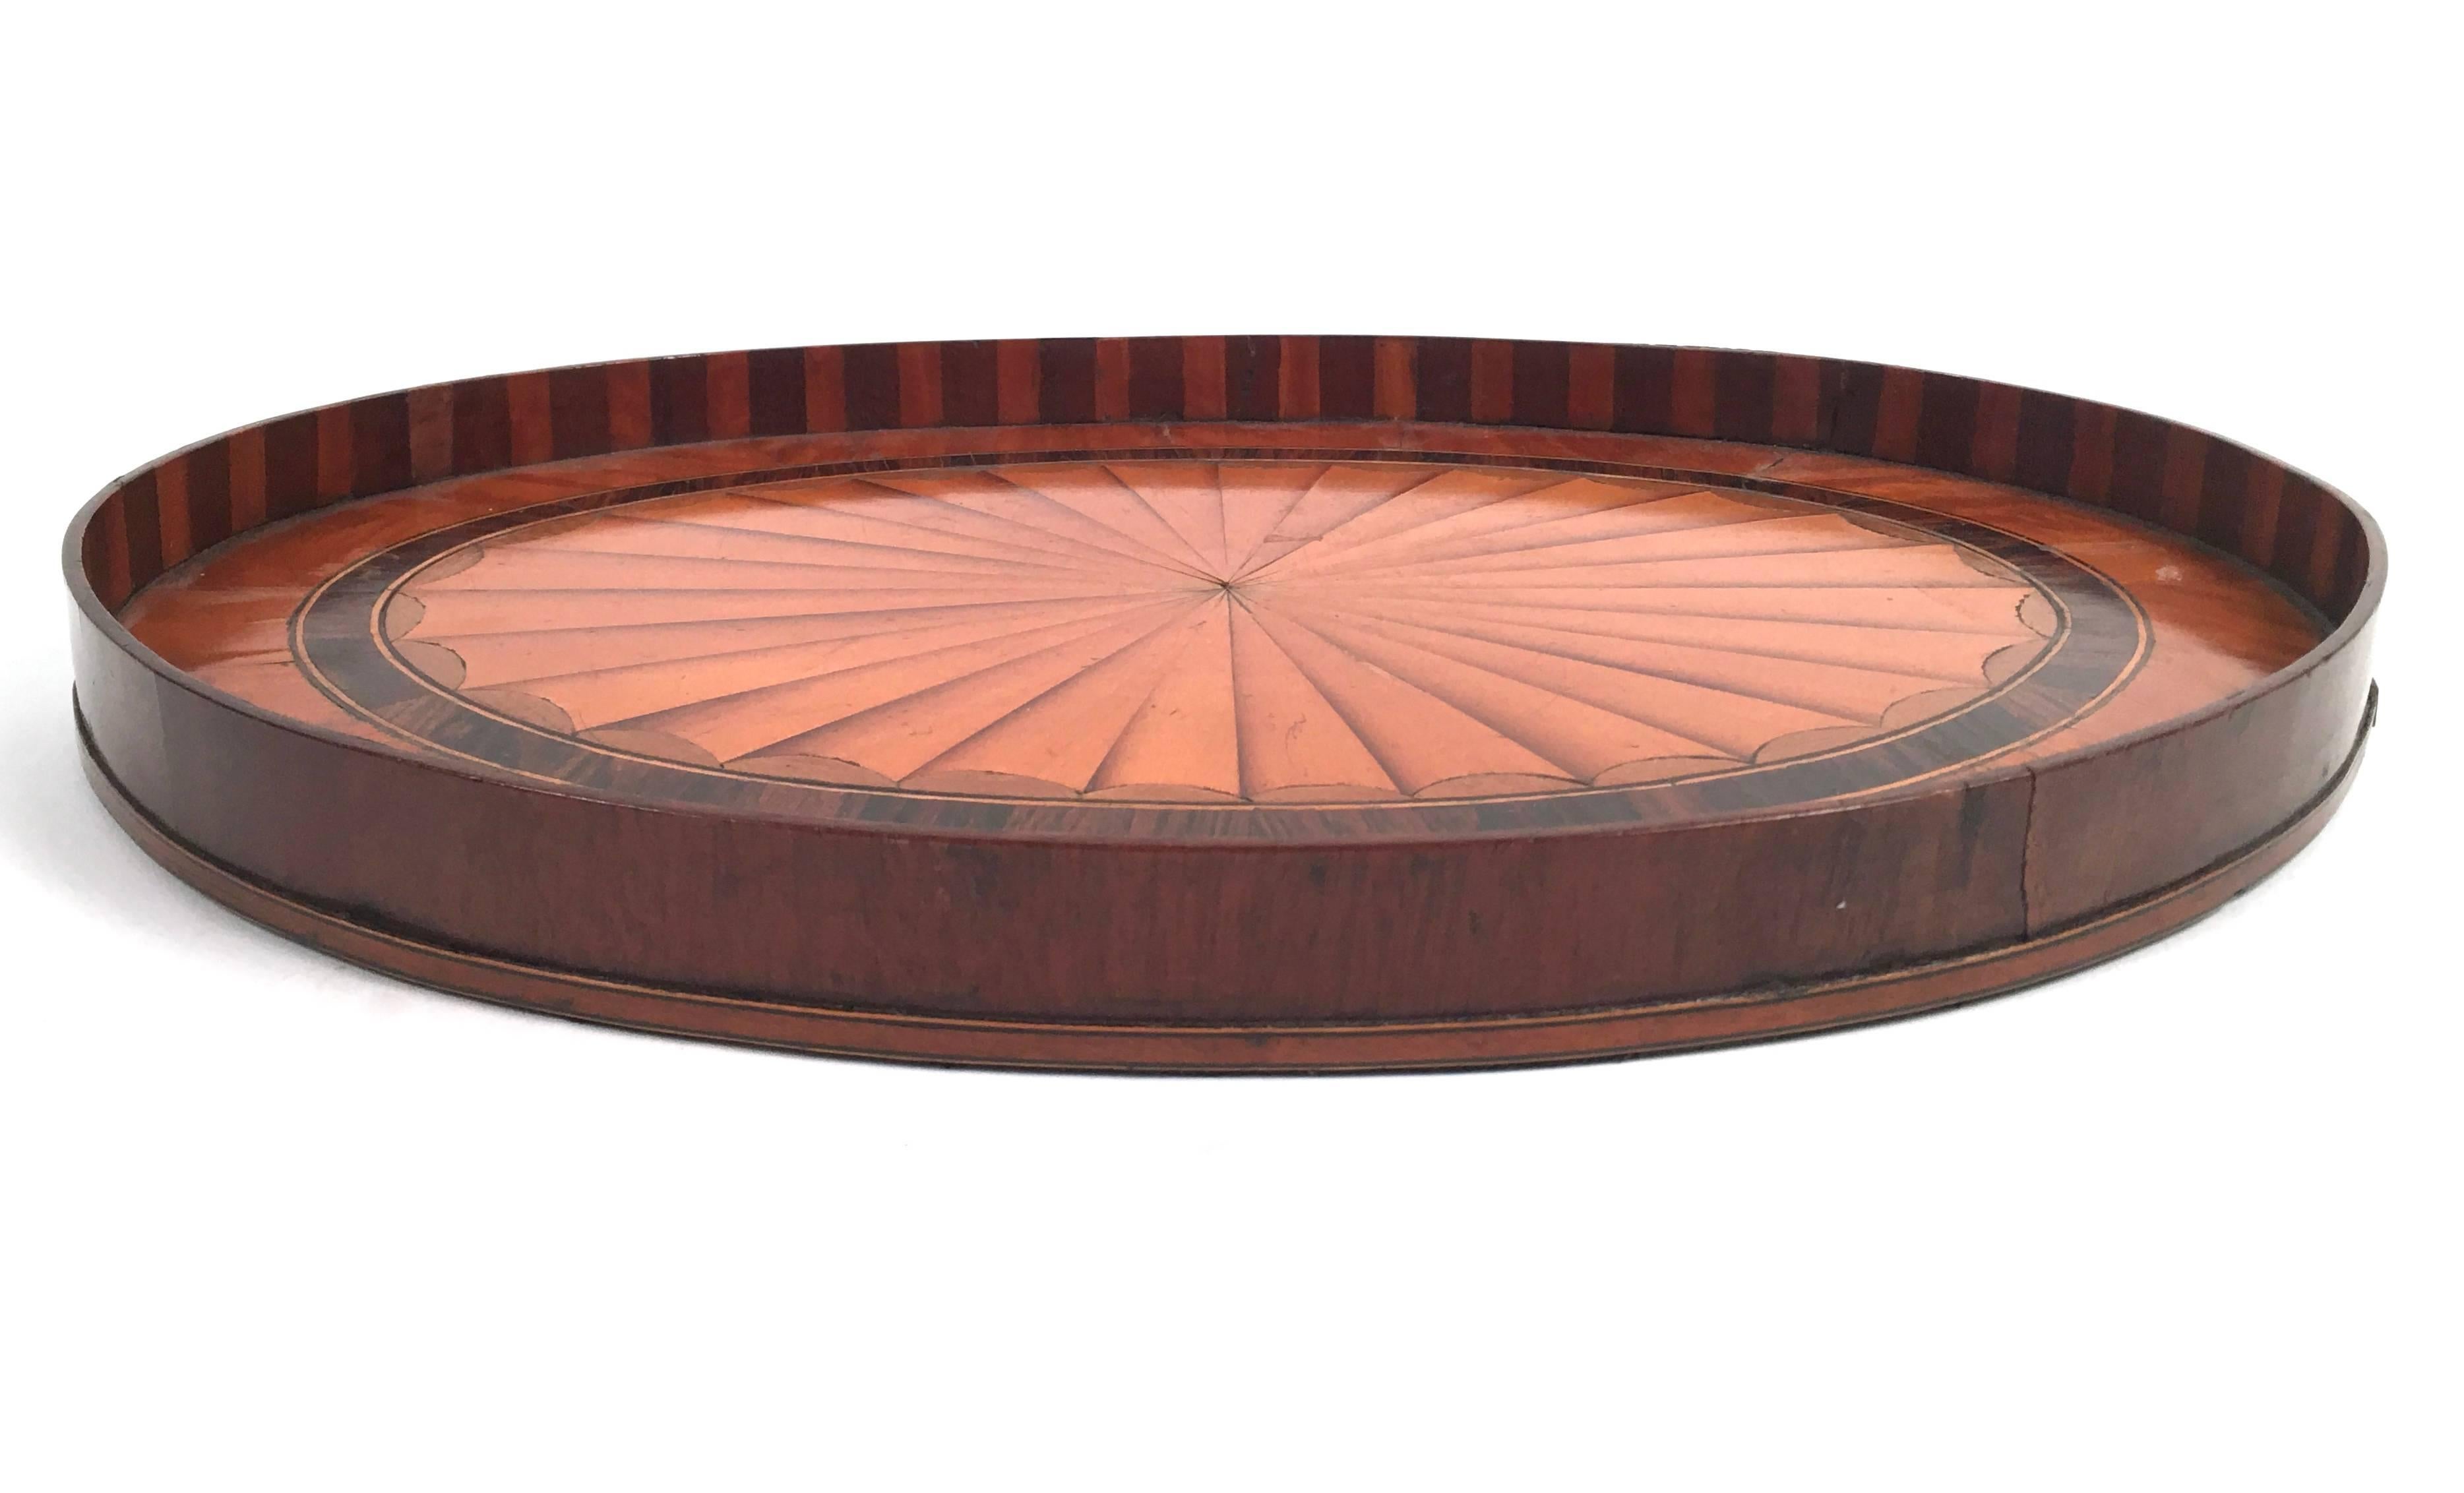 A beautifully crafted a and very graphic small Georgian oval tray, with mahogany edge and base, veneered with rosewood, boxwood and satinwood marquetry in the form of a three dimensional circular fan or batwing. The bottom is lined with black felt.